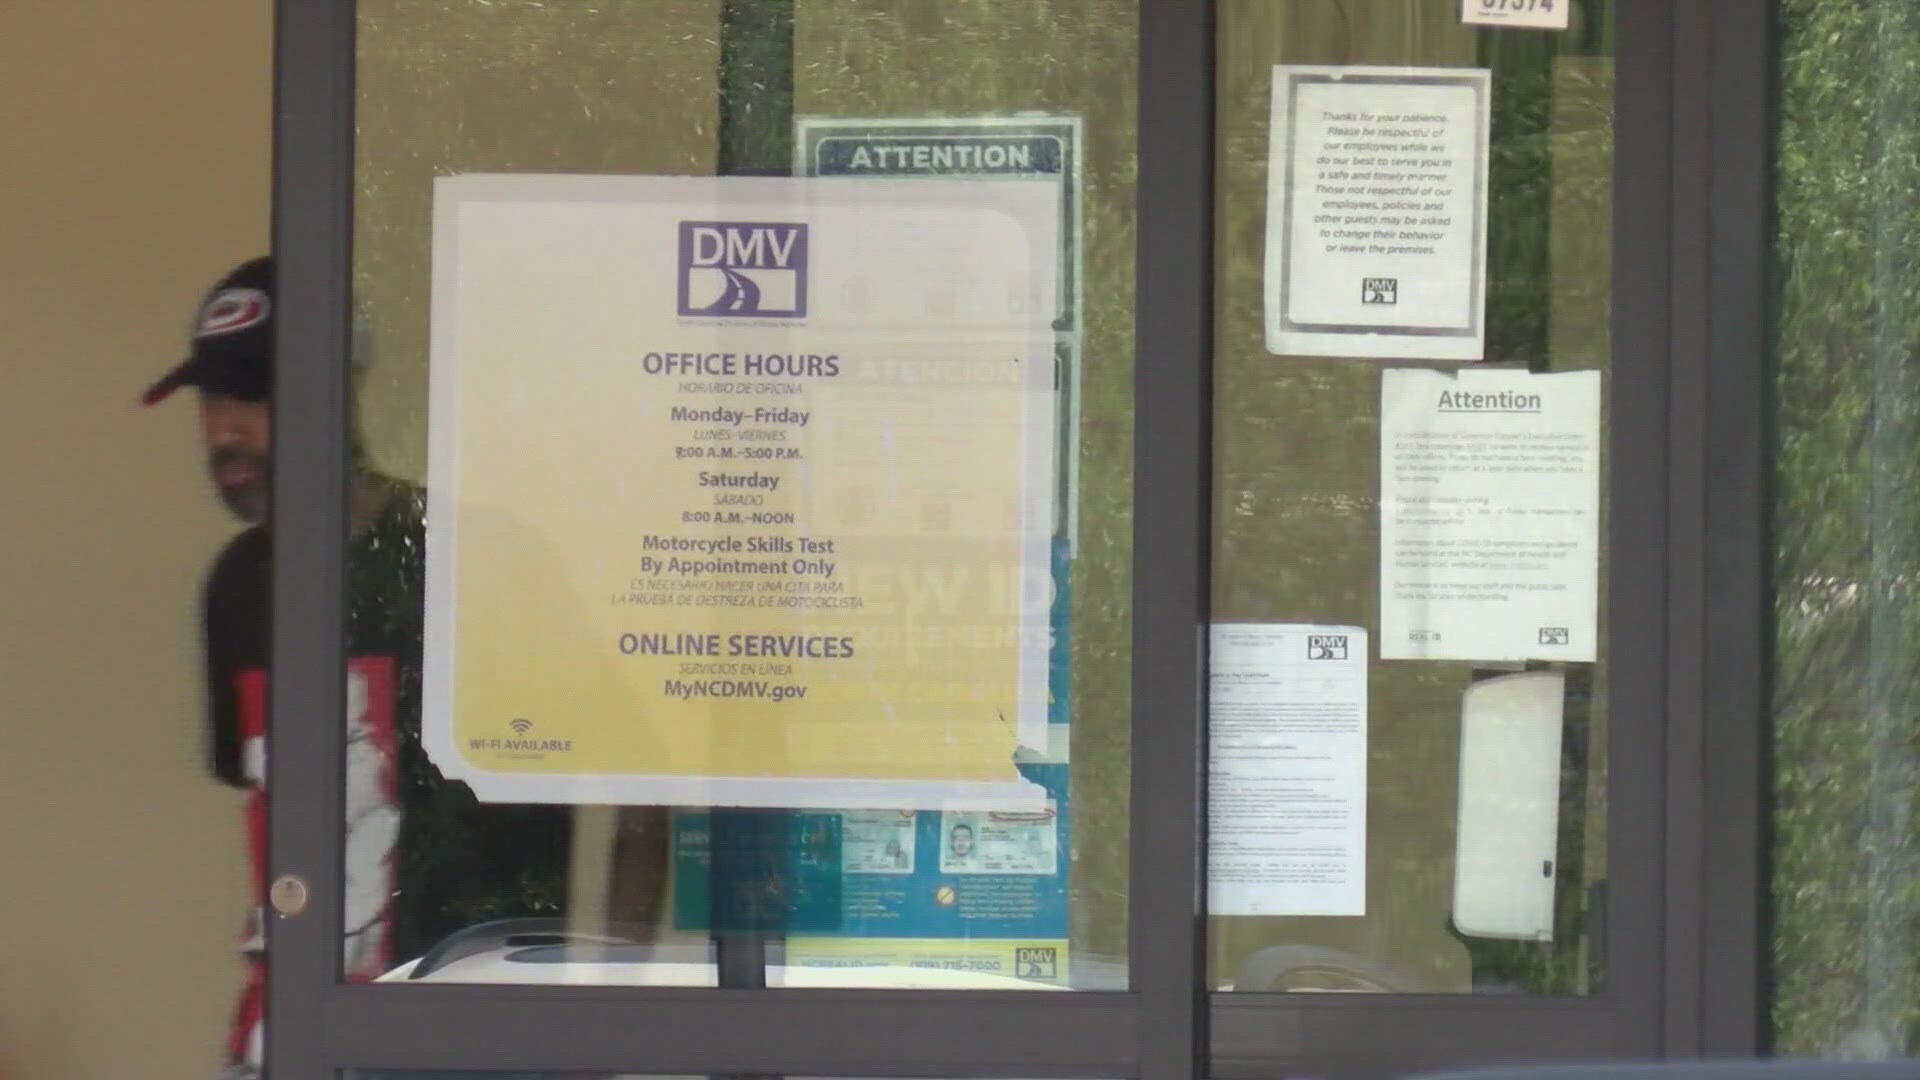 The DMV commissioner said digital licenses are more secure than physical ones.